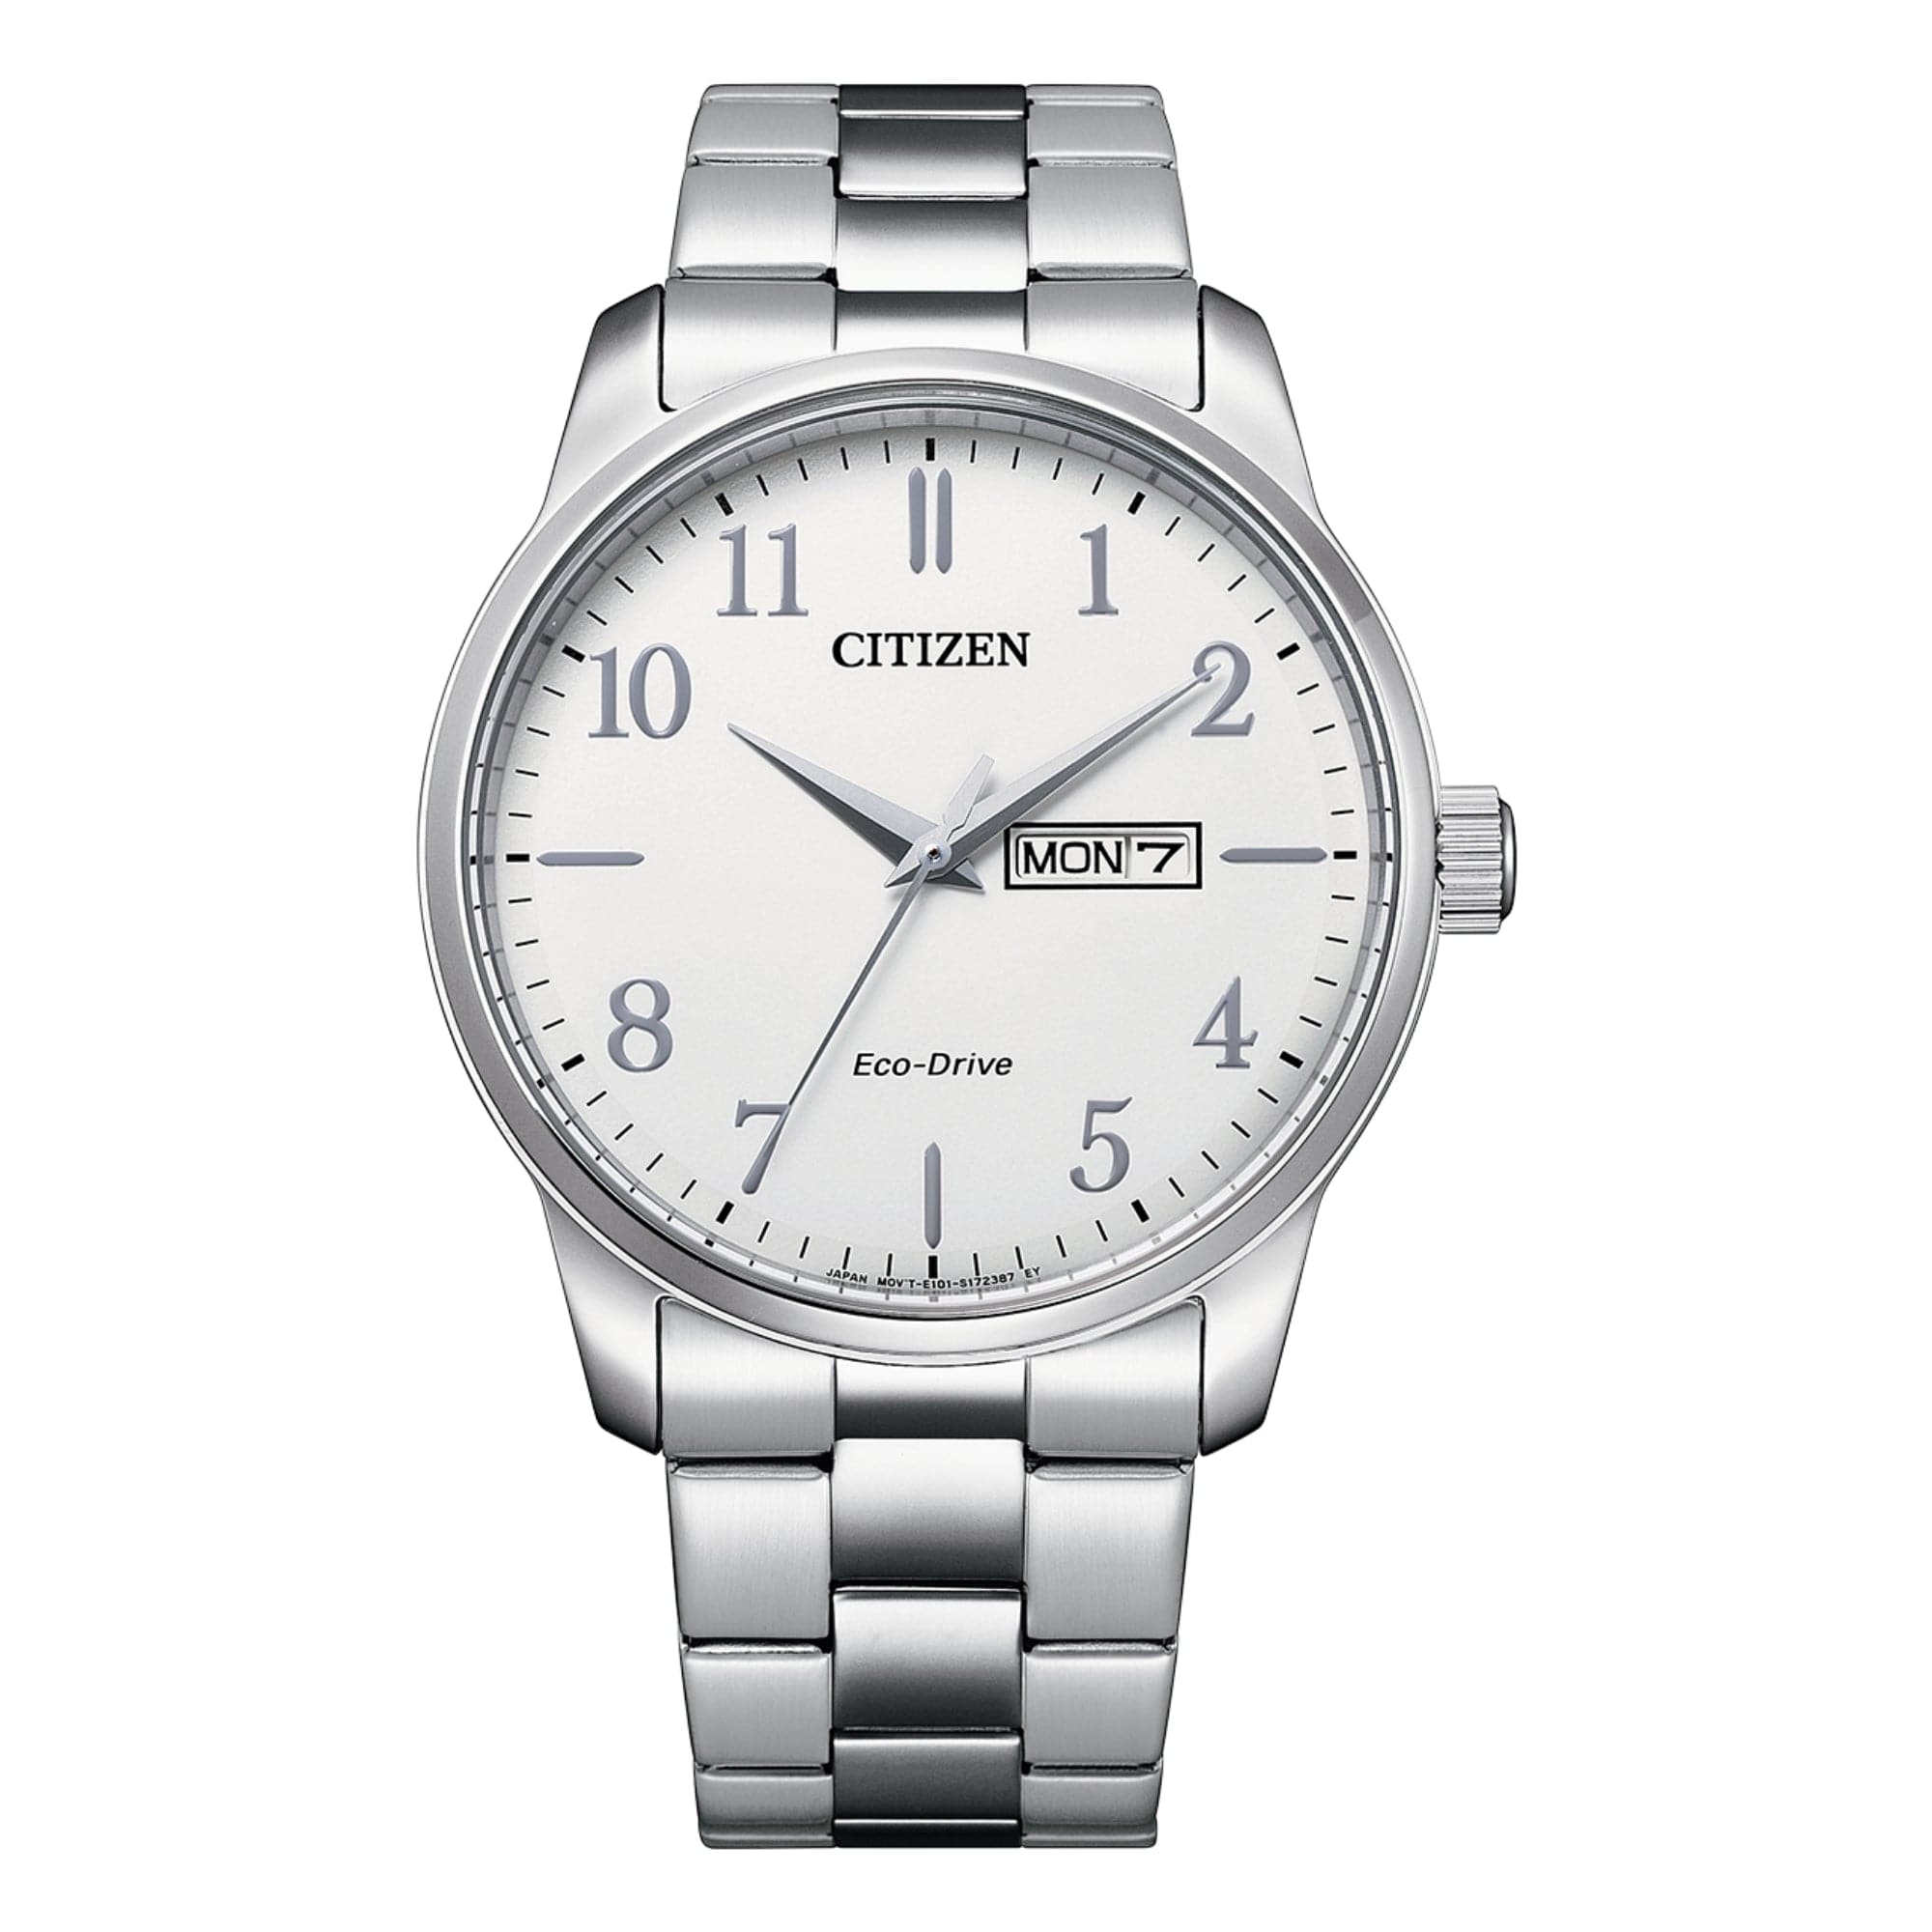 The Citizen Eco-Drive Black Washi Paper Dial Limited Edition